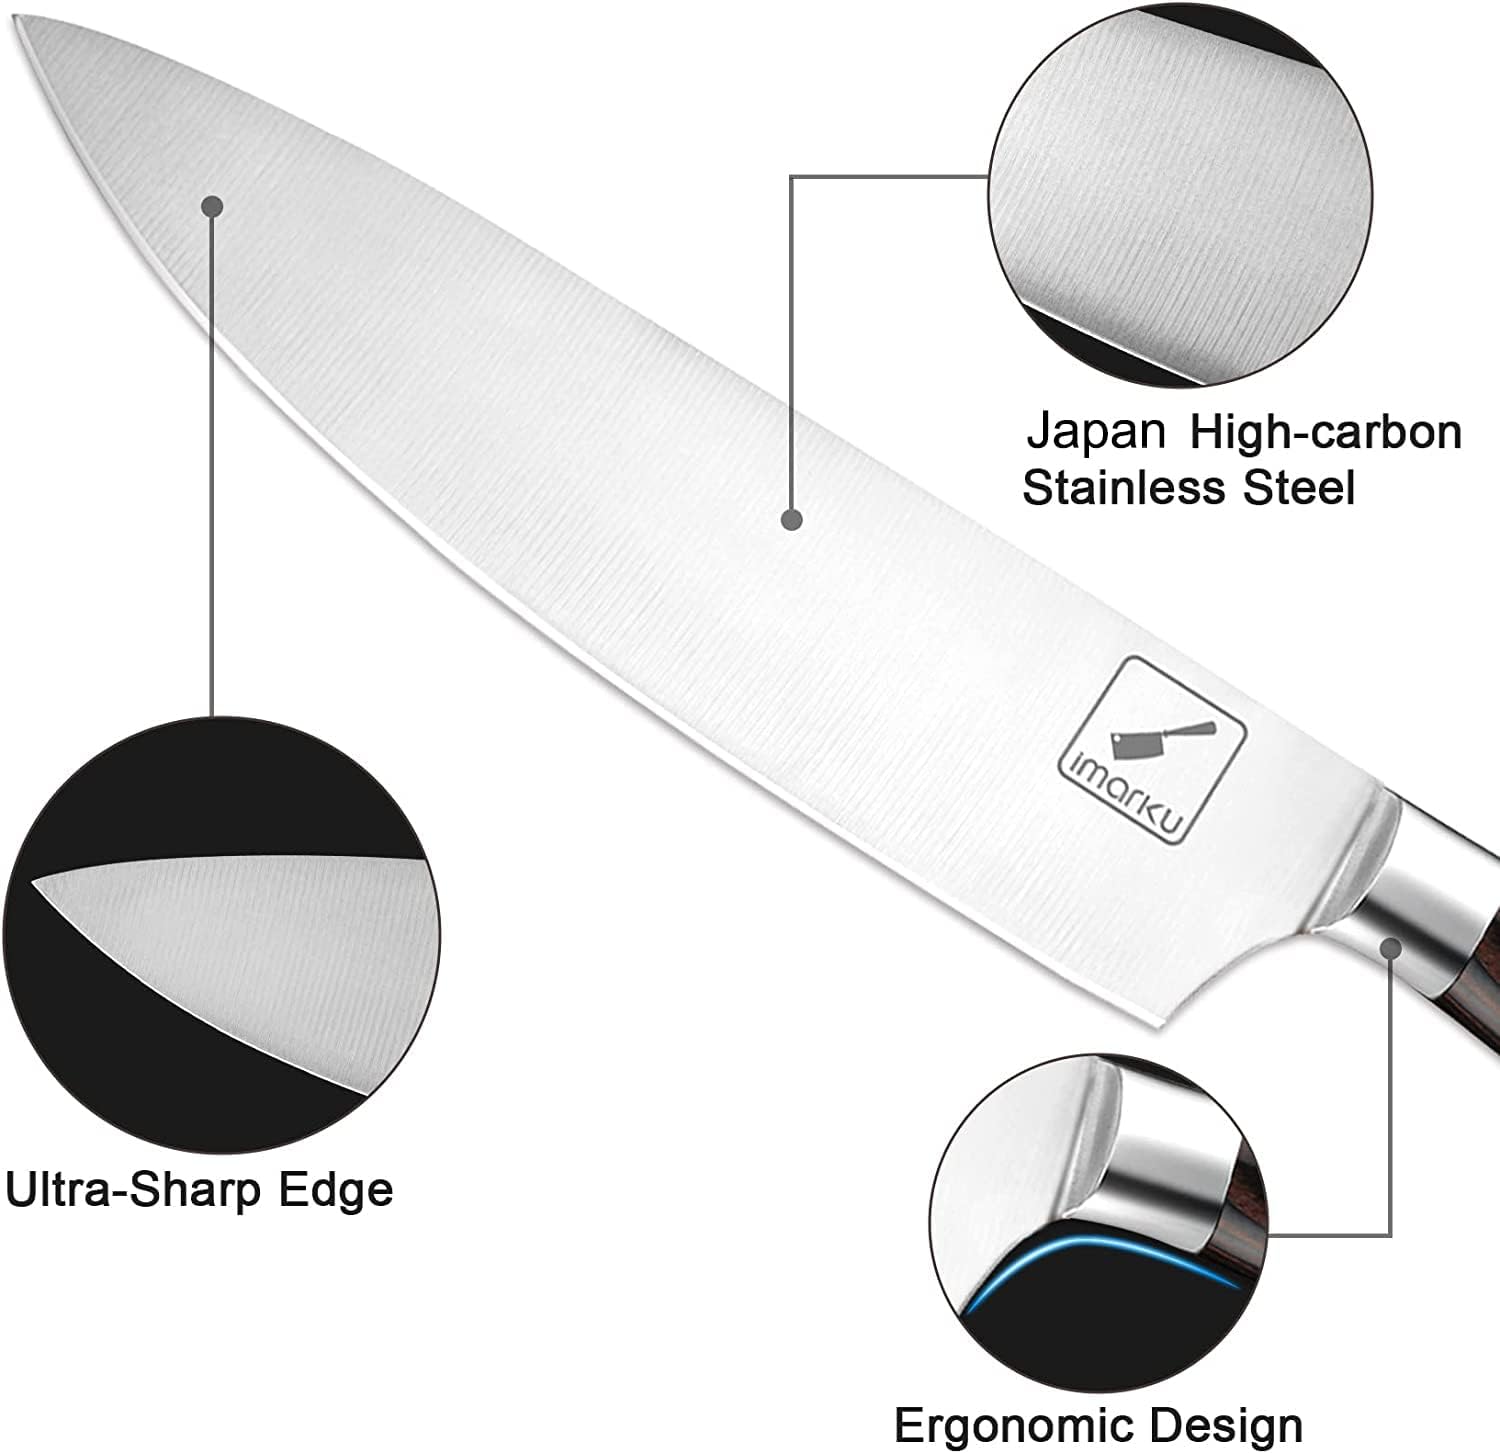 11 Knife Cuts Everyone Should Know